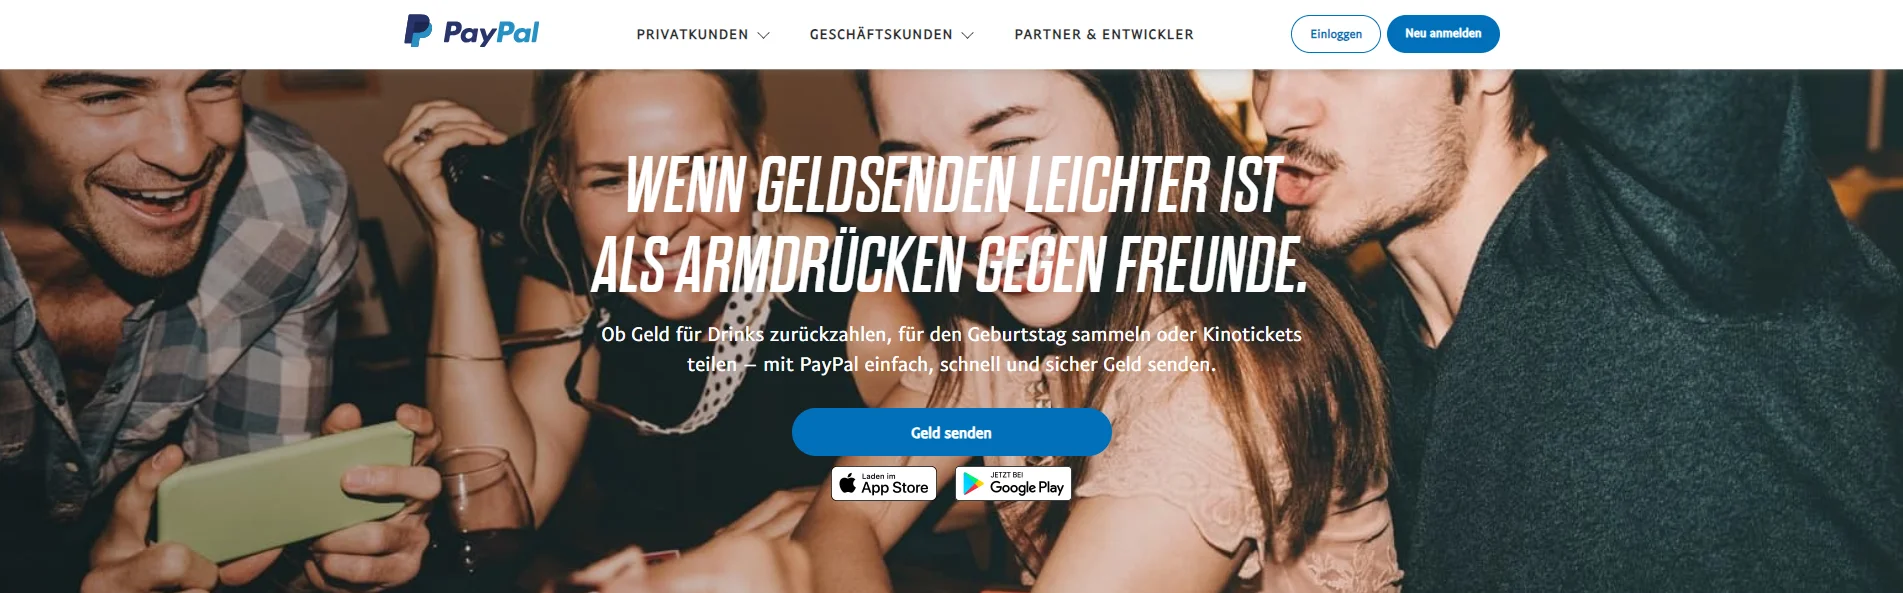 Paypal bei Online Casino